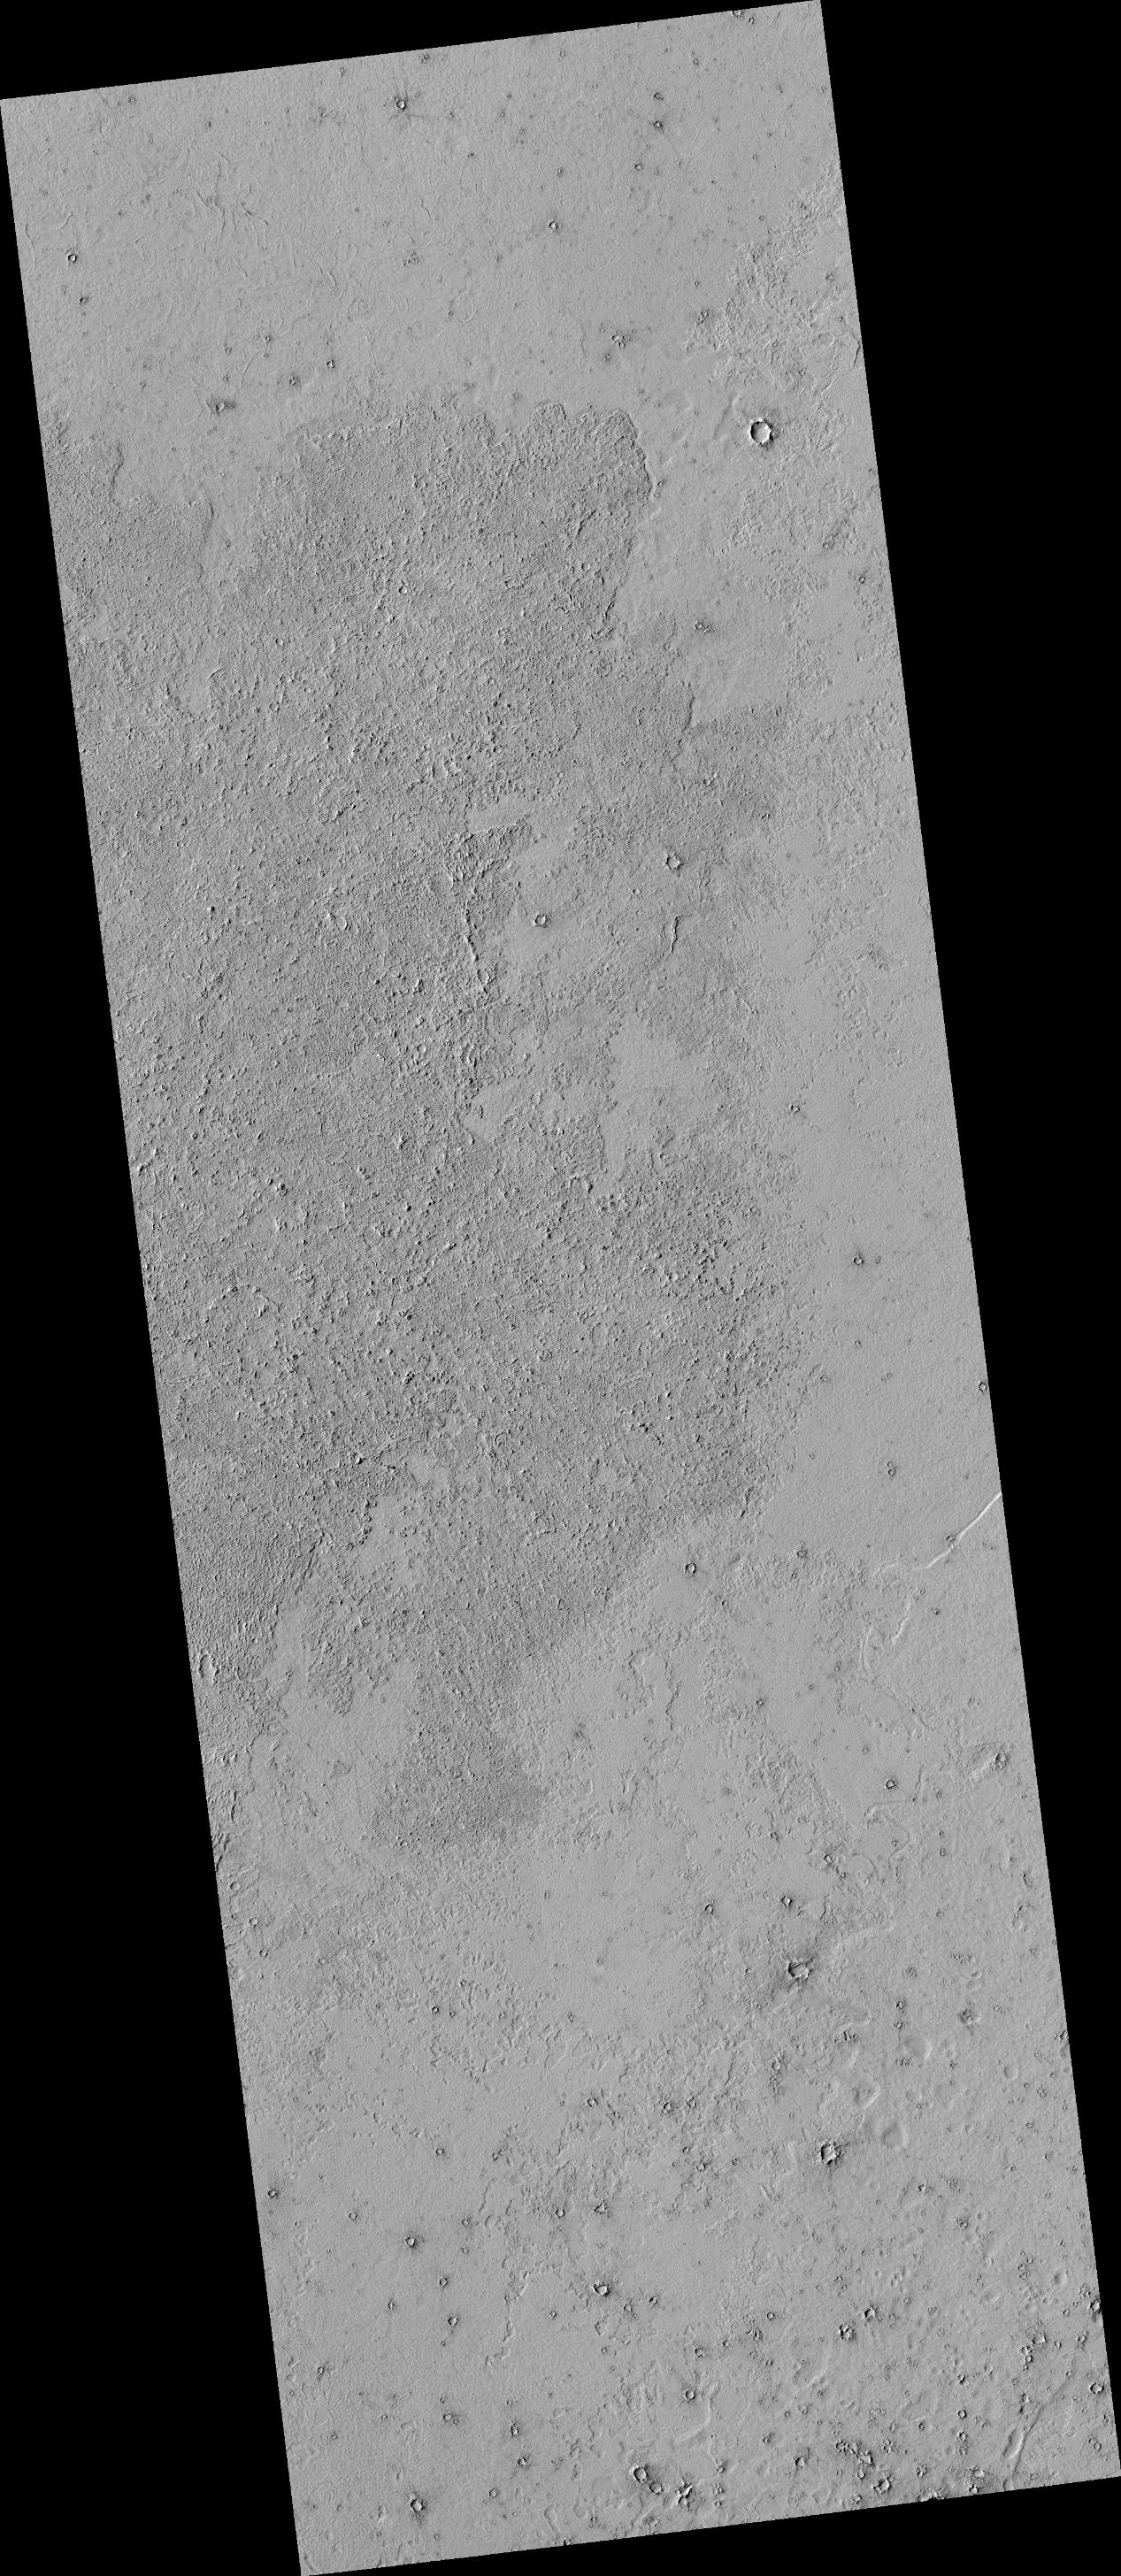 This image shows details of the lava covered plains near the equator of Mars. The darker looking area has a rough lava surface with all the shadows giving the region a darker appearance.